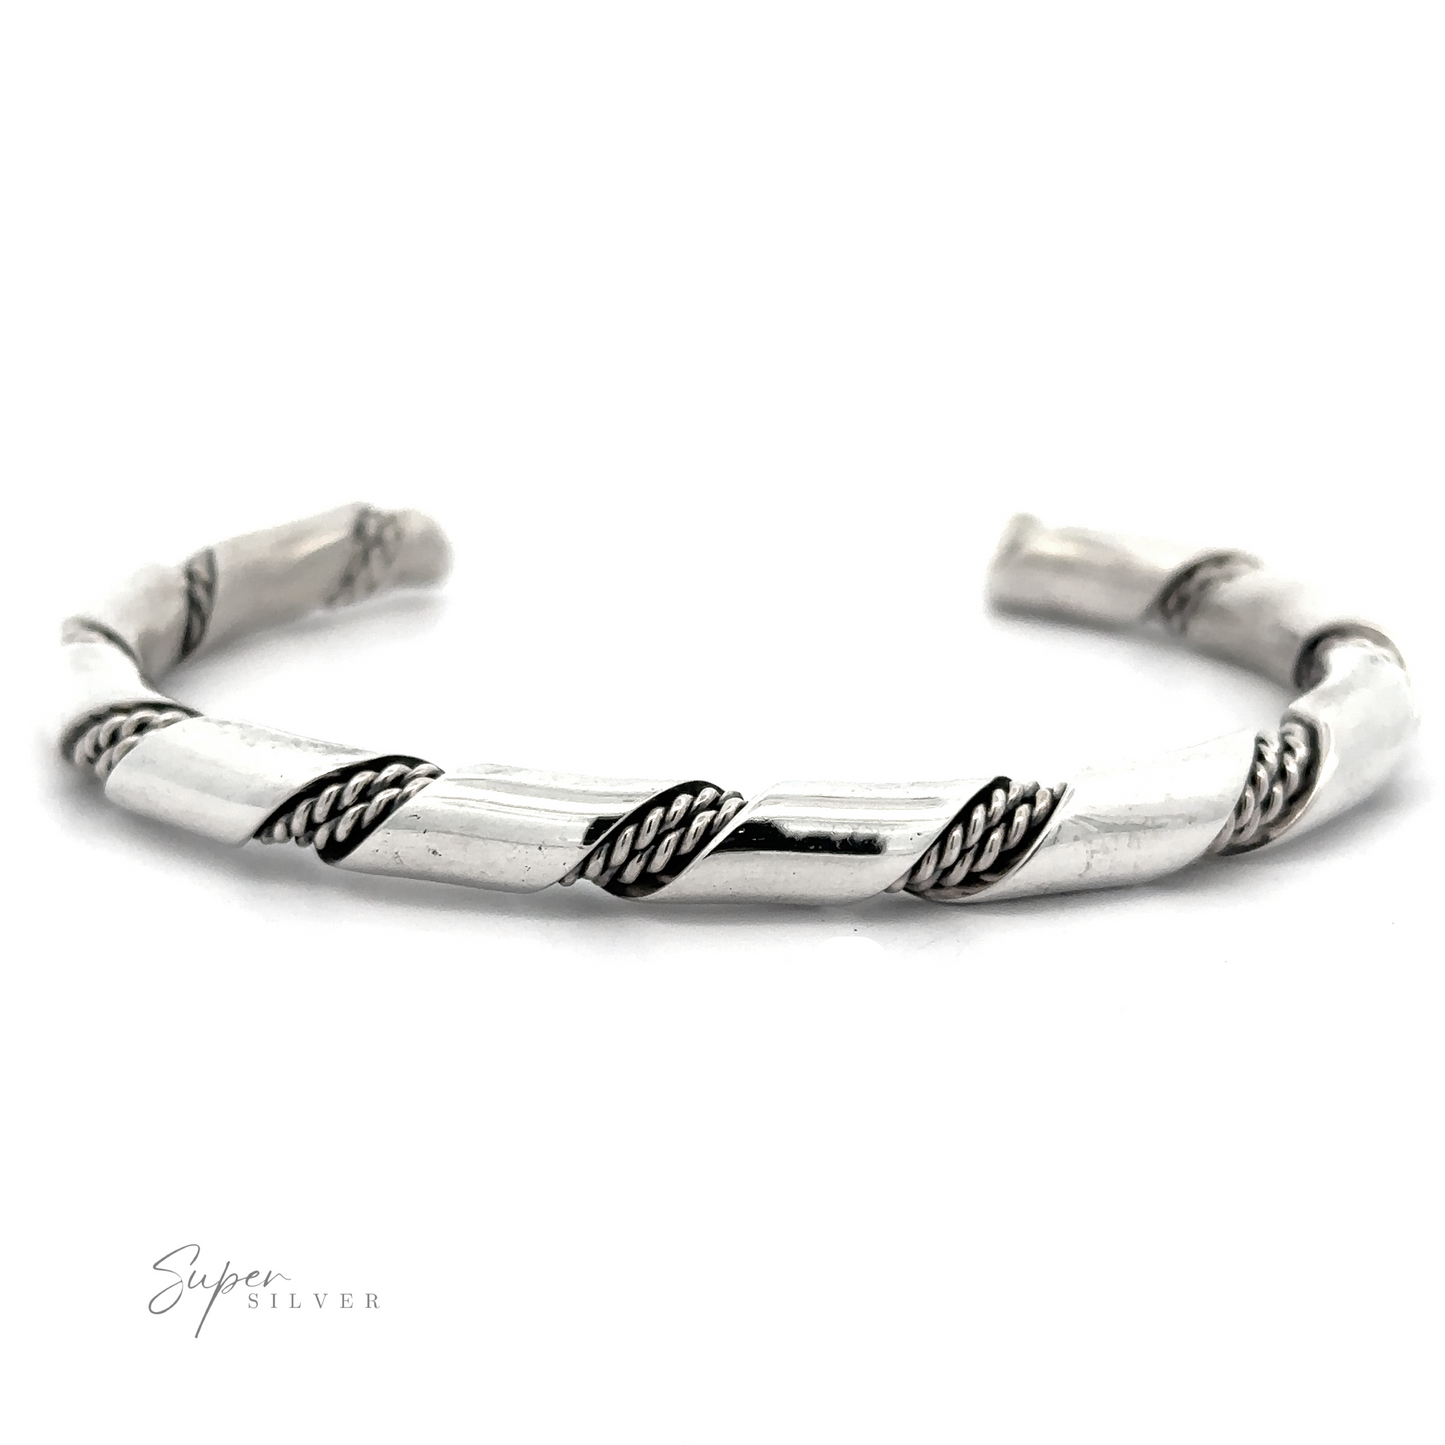 
                  
                    Native American Handmade Thick Silver Twist Cuff with a twisted rope design, featuring alternating smooth and textured sections. Crafted from authentic sterling silver, the cuff is slightly open at one end and has a polished finish. "Super Silver" is engraved at the bottom left.
                  
                